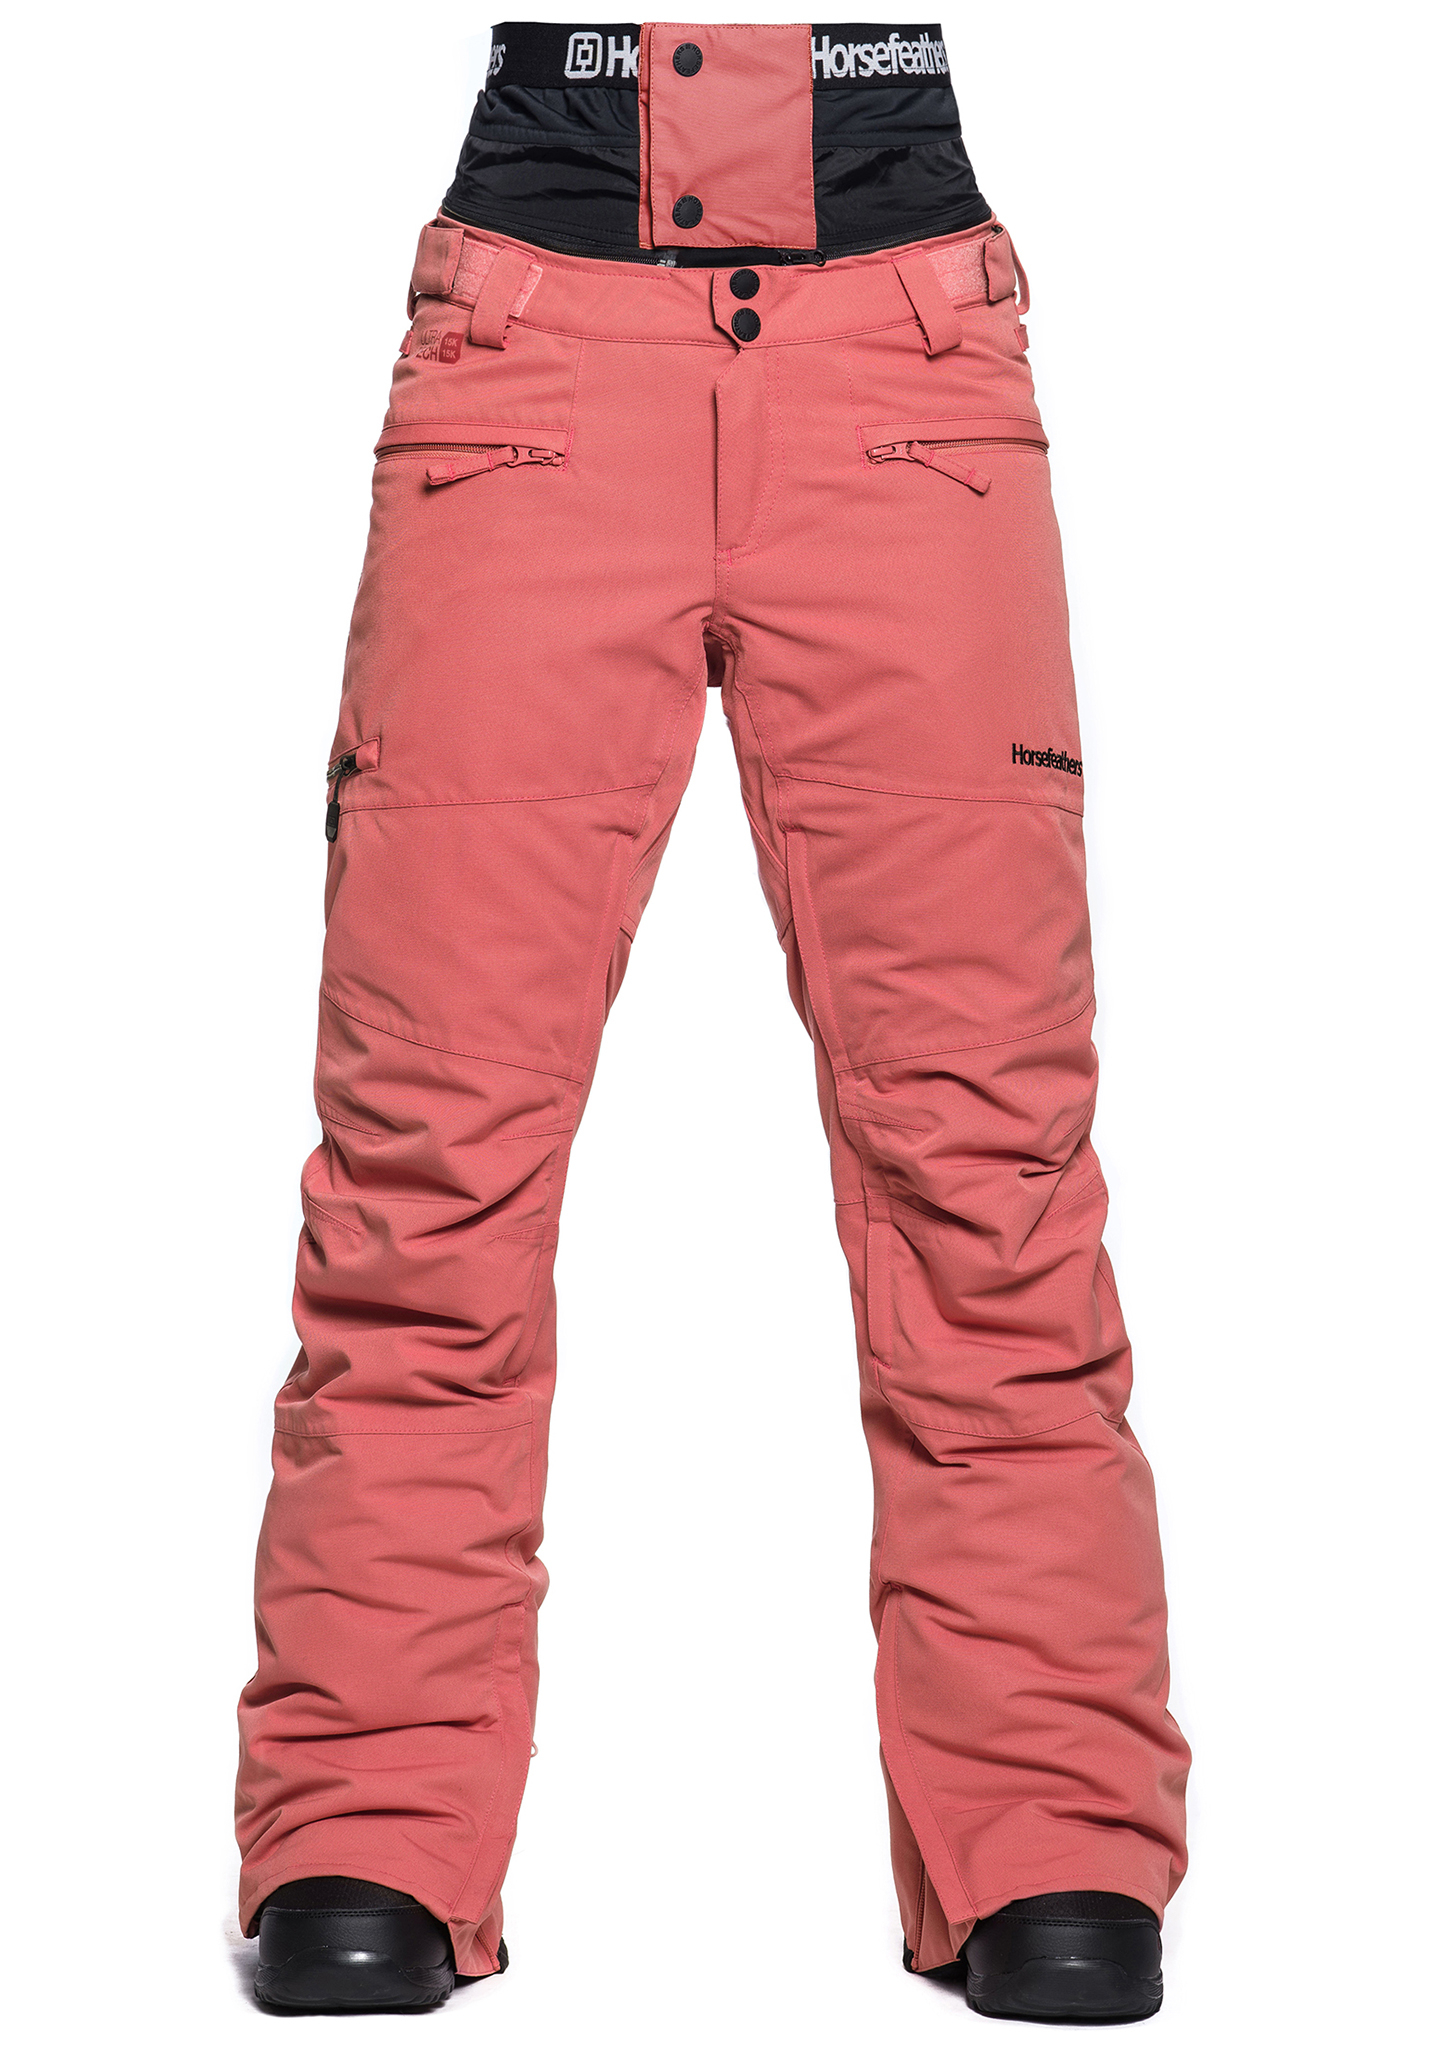 Horsefeathers Lotte 15 Snowboardhosen spiced coral S